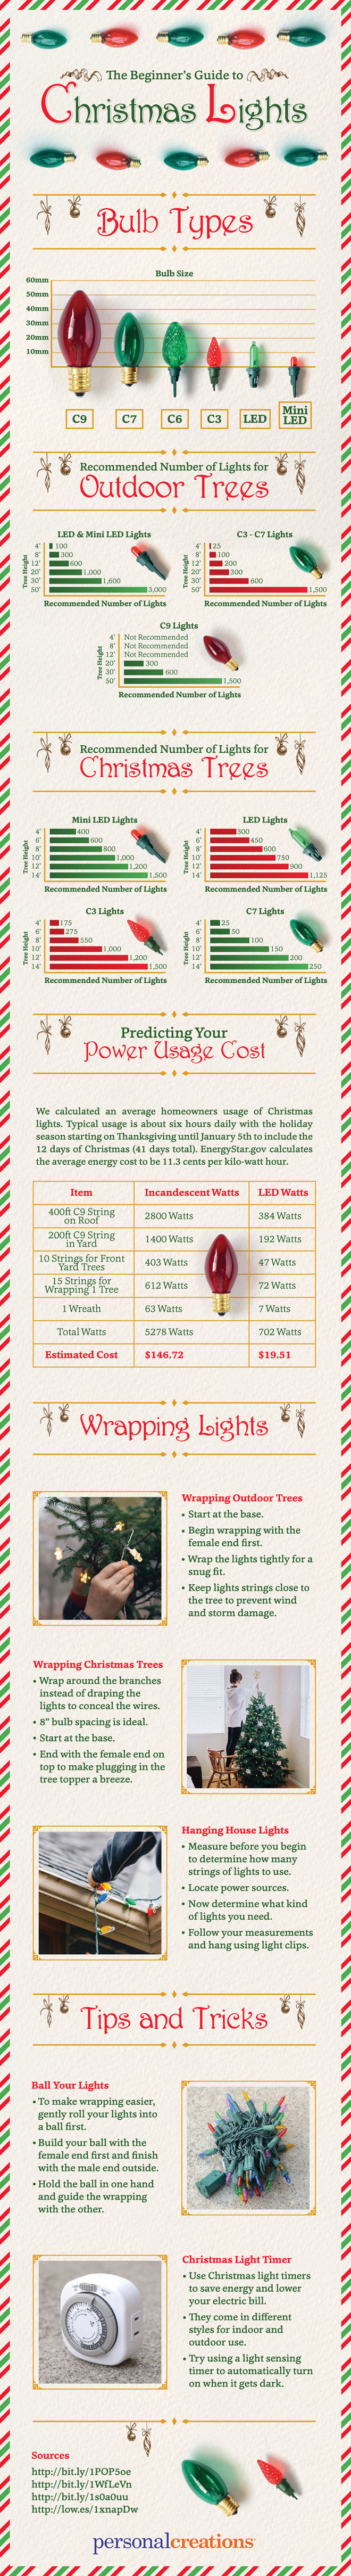 The beginner's guide to Christmas lights. How to care for your Christmas Lights. How to store Christmas Lights. How to Install Christmas Lights. Everything you need to know about Christmas Lights. #ChristmasLights Via Personal Creations.